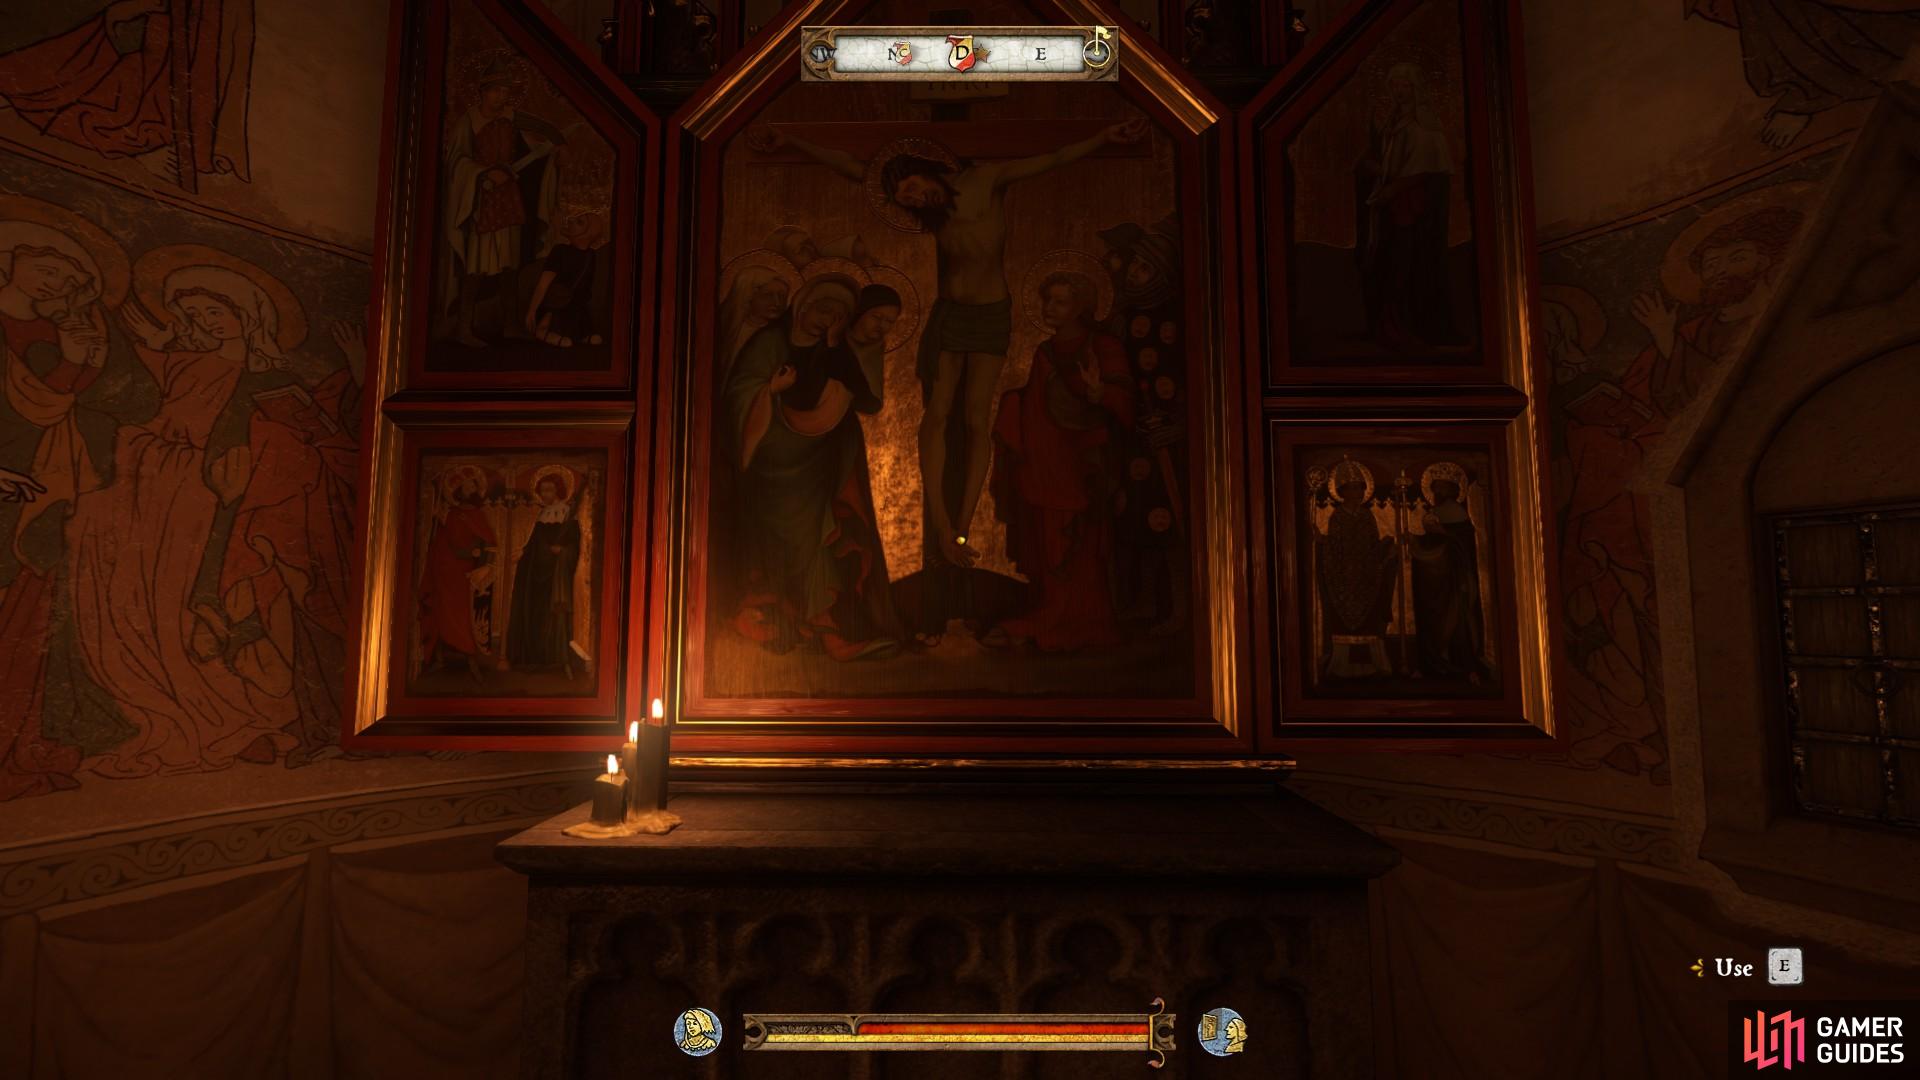 Wait in the church until night falls, at which point you will be able to use the altar to trigger a cut scene.